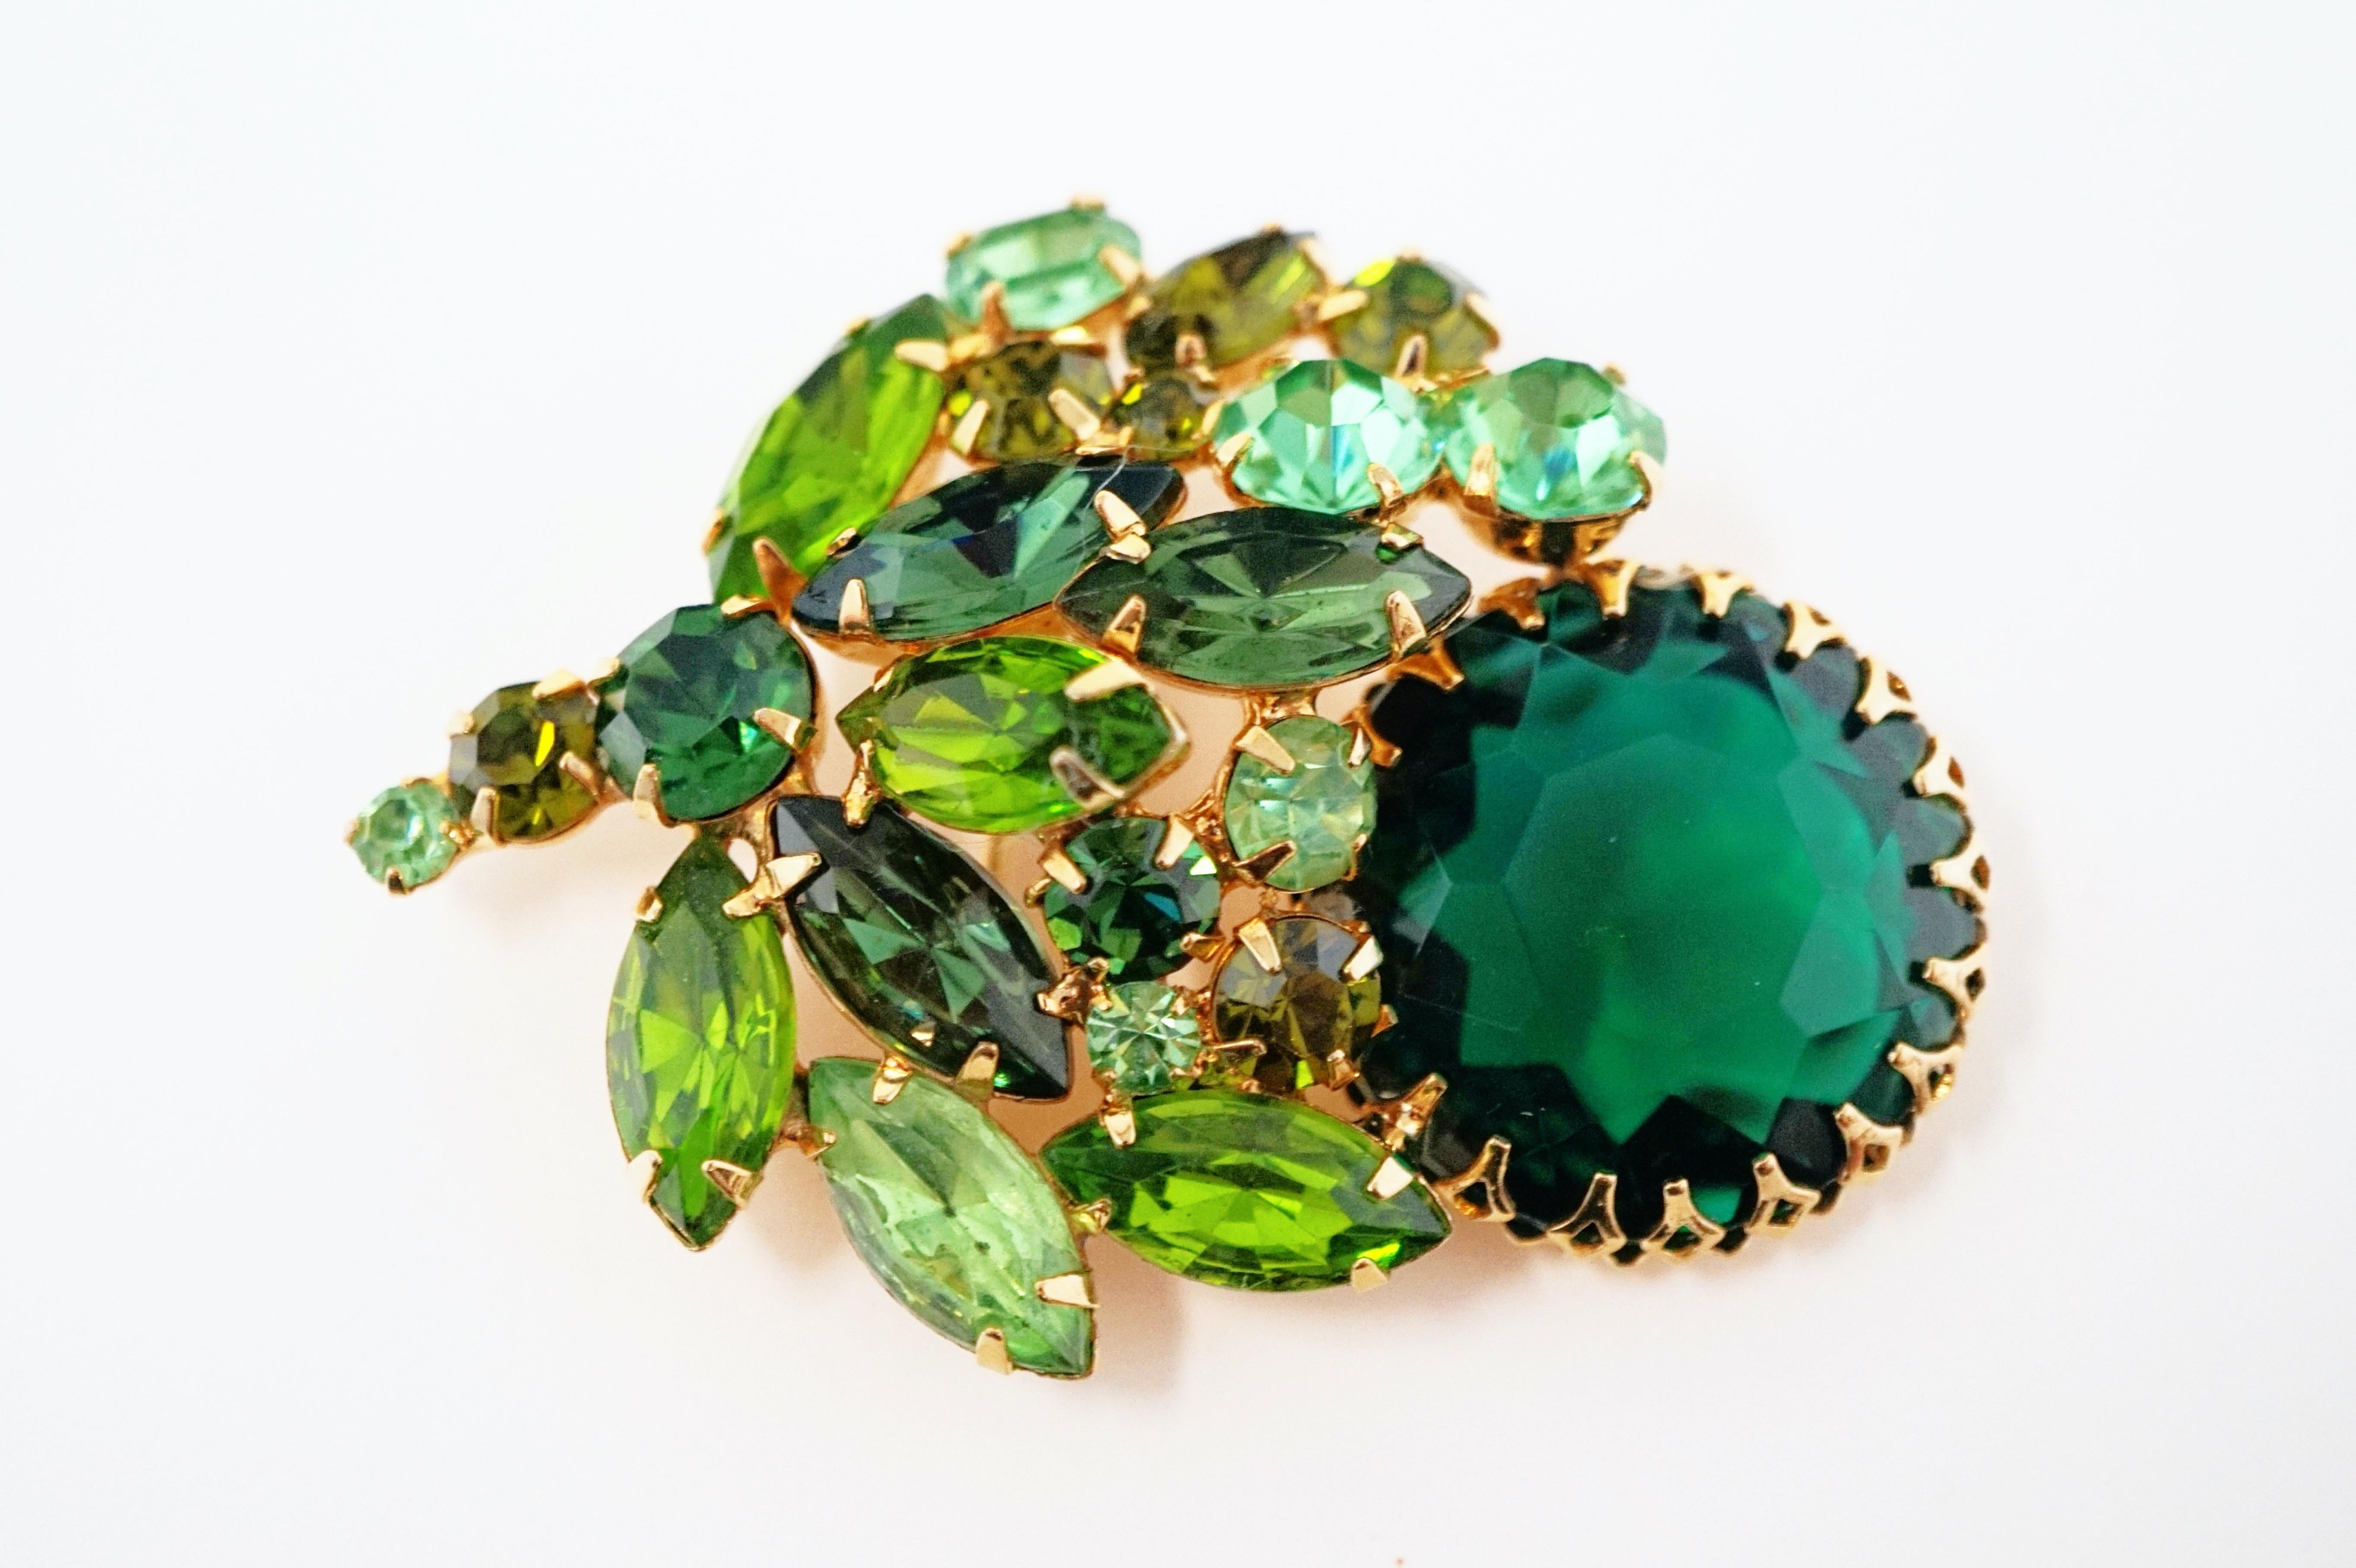 Absolutely stunning three dimensional statement brooch by iconic mid-century costume jewelry brand Weiss, circa 1950s. This piece is composed of sparkling Emerald and Peridot green colored crystal rhinestones prong set in gilded hardware. This